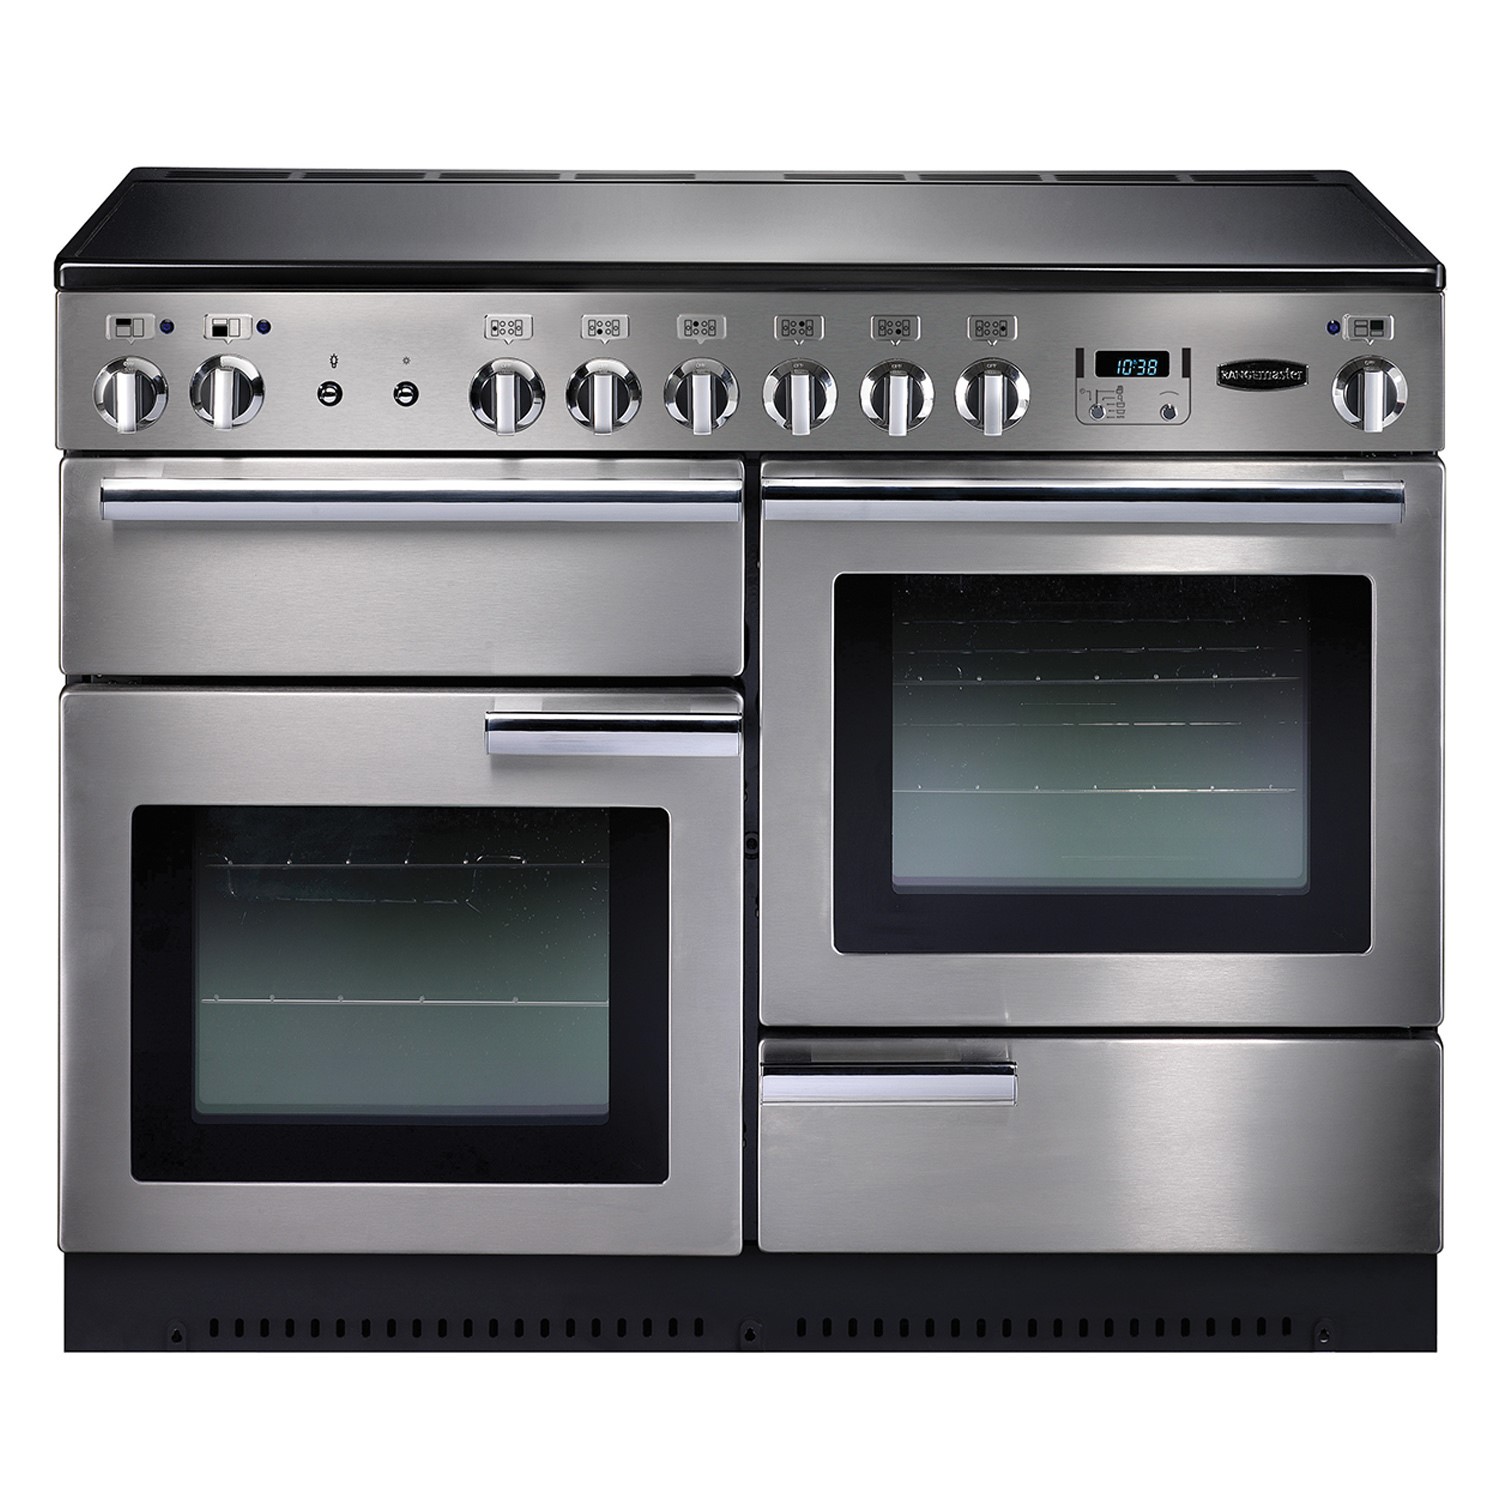 Rangemaster Professional Plus PROP110ECSS/C 110cm Electric Range Cooker with Ceramic Hob - Stainless Steel - A/A Rated